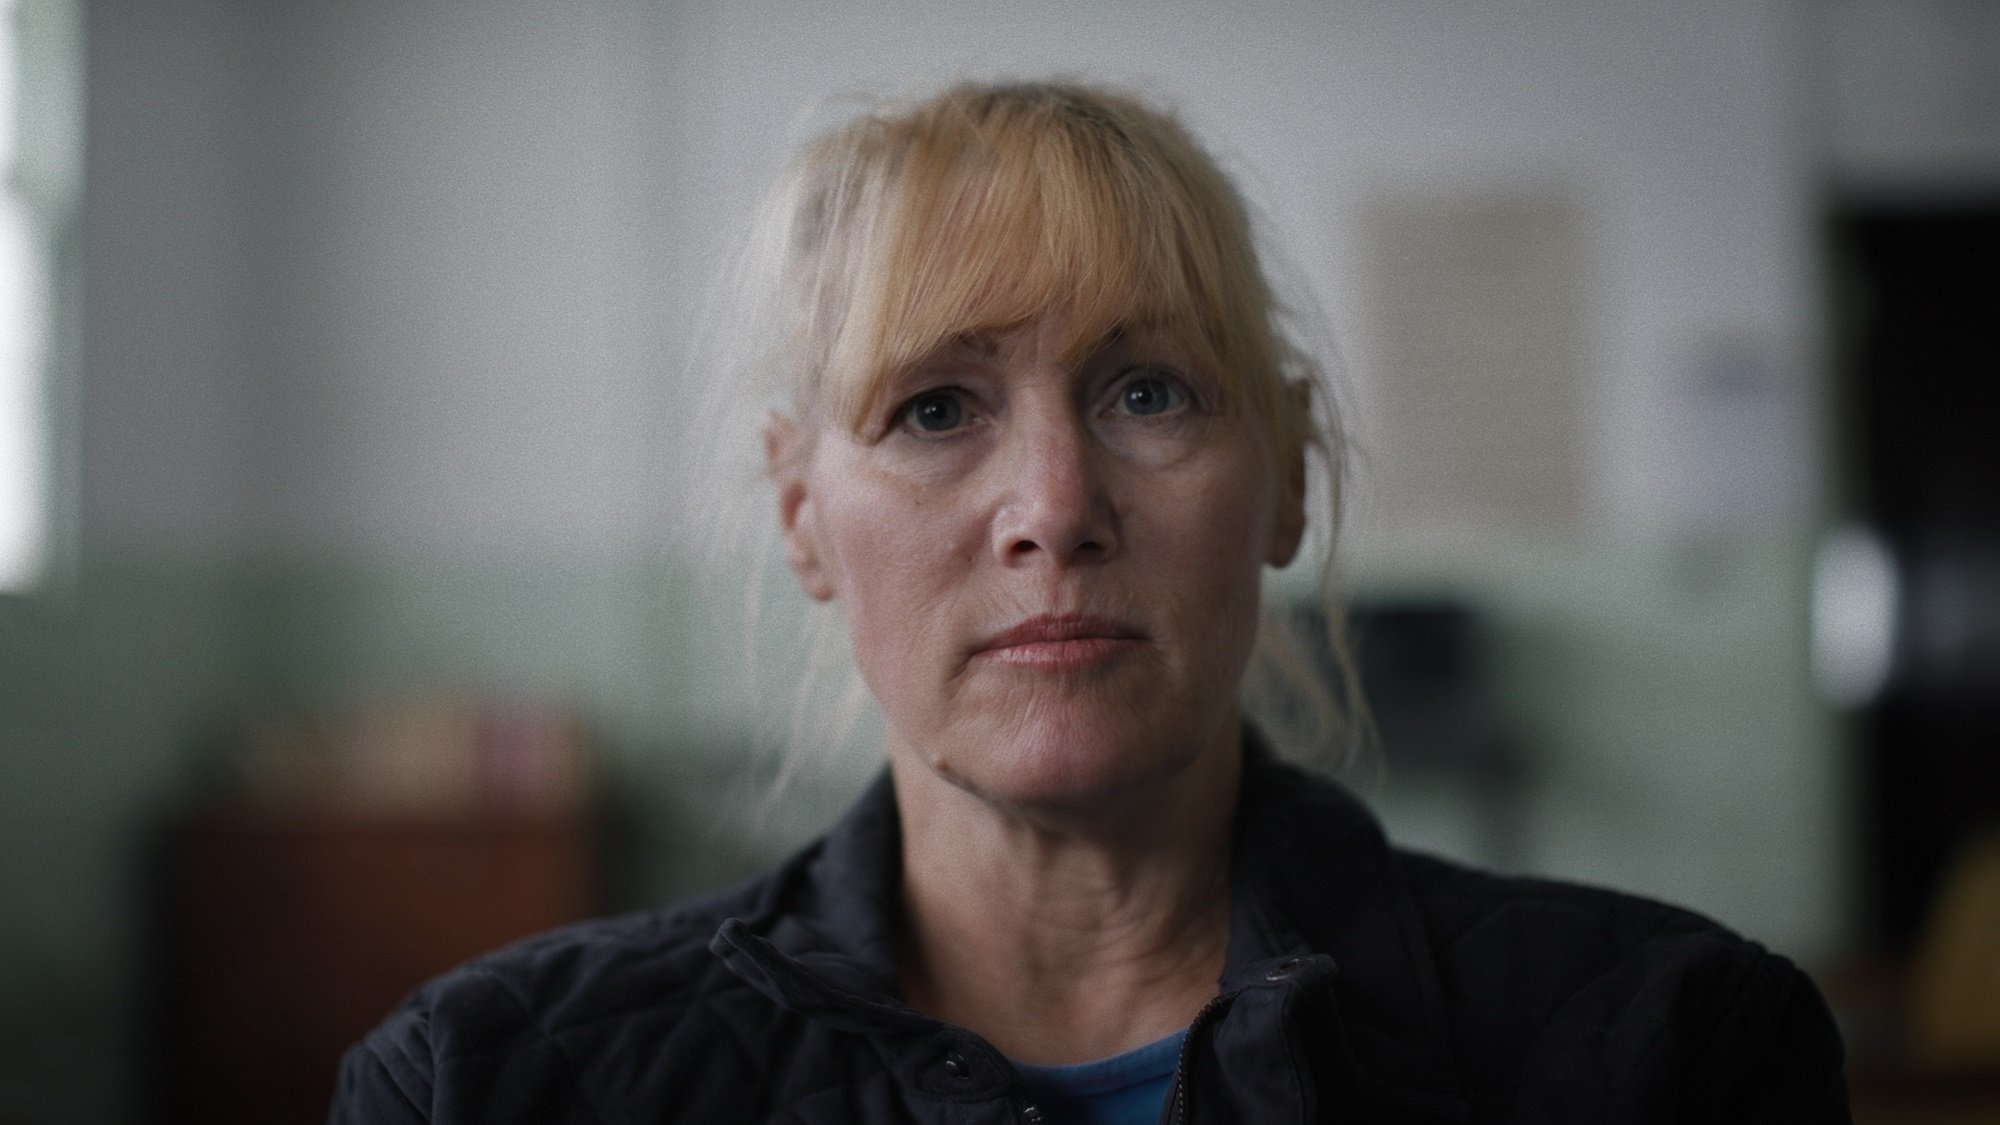 'Killer Sally': Sally McNeil gives an interview in the documentary since she left prison